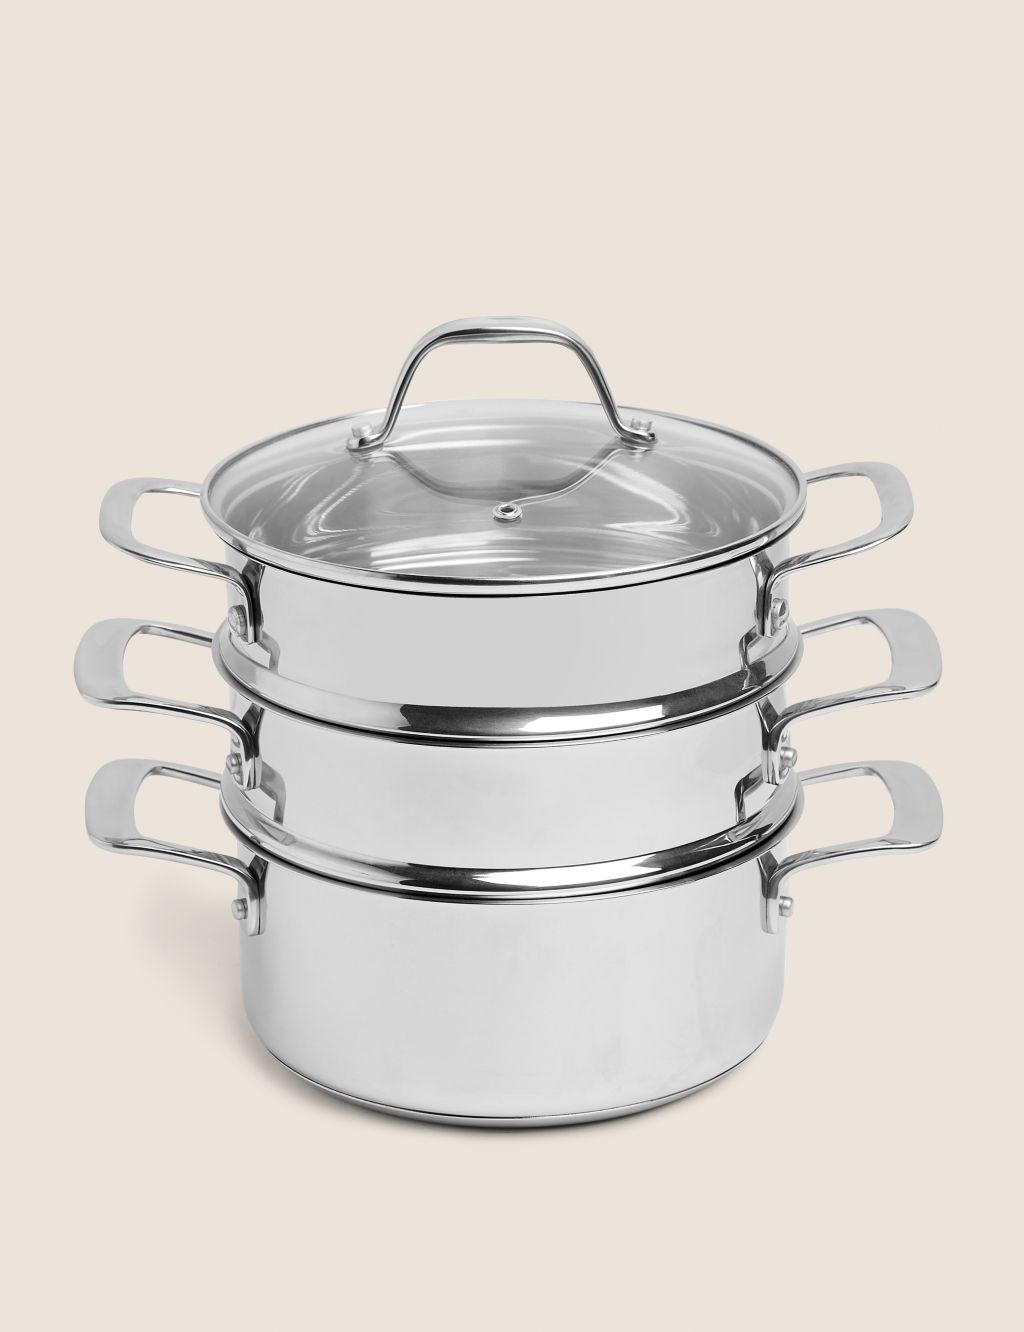 Stainless Steel 3 Tier Steamer image 1